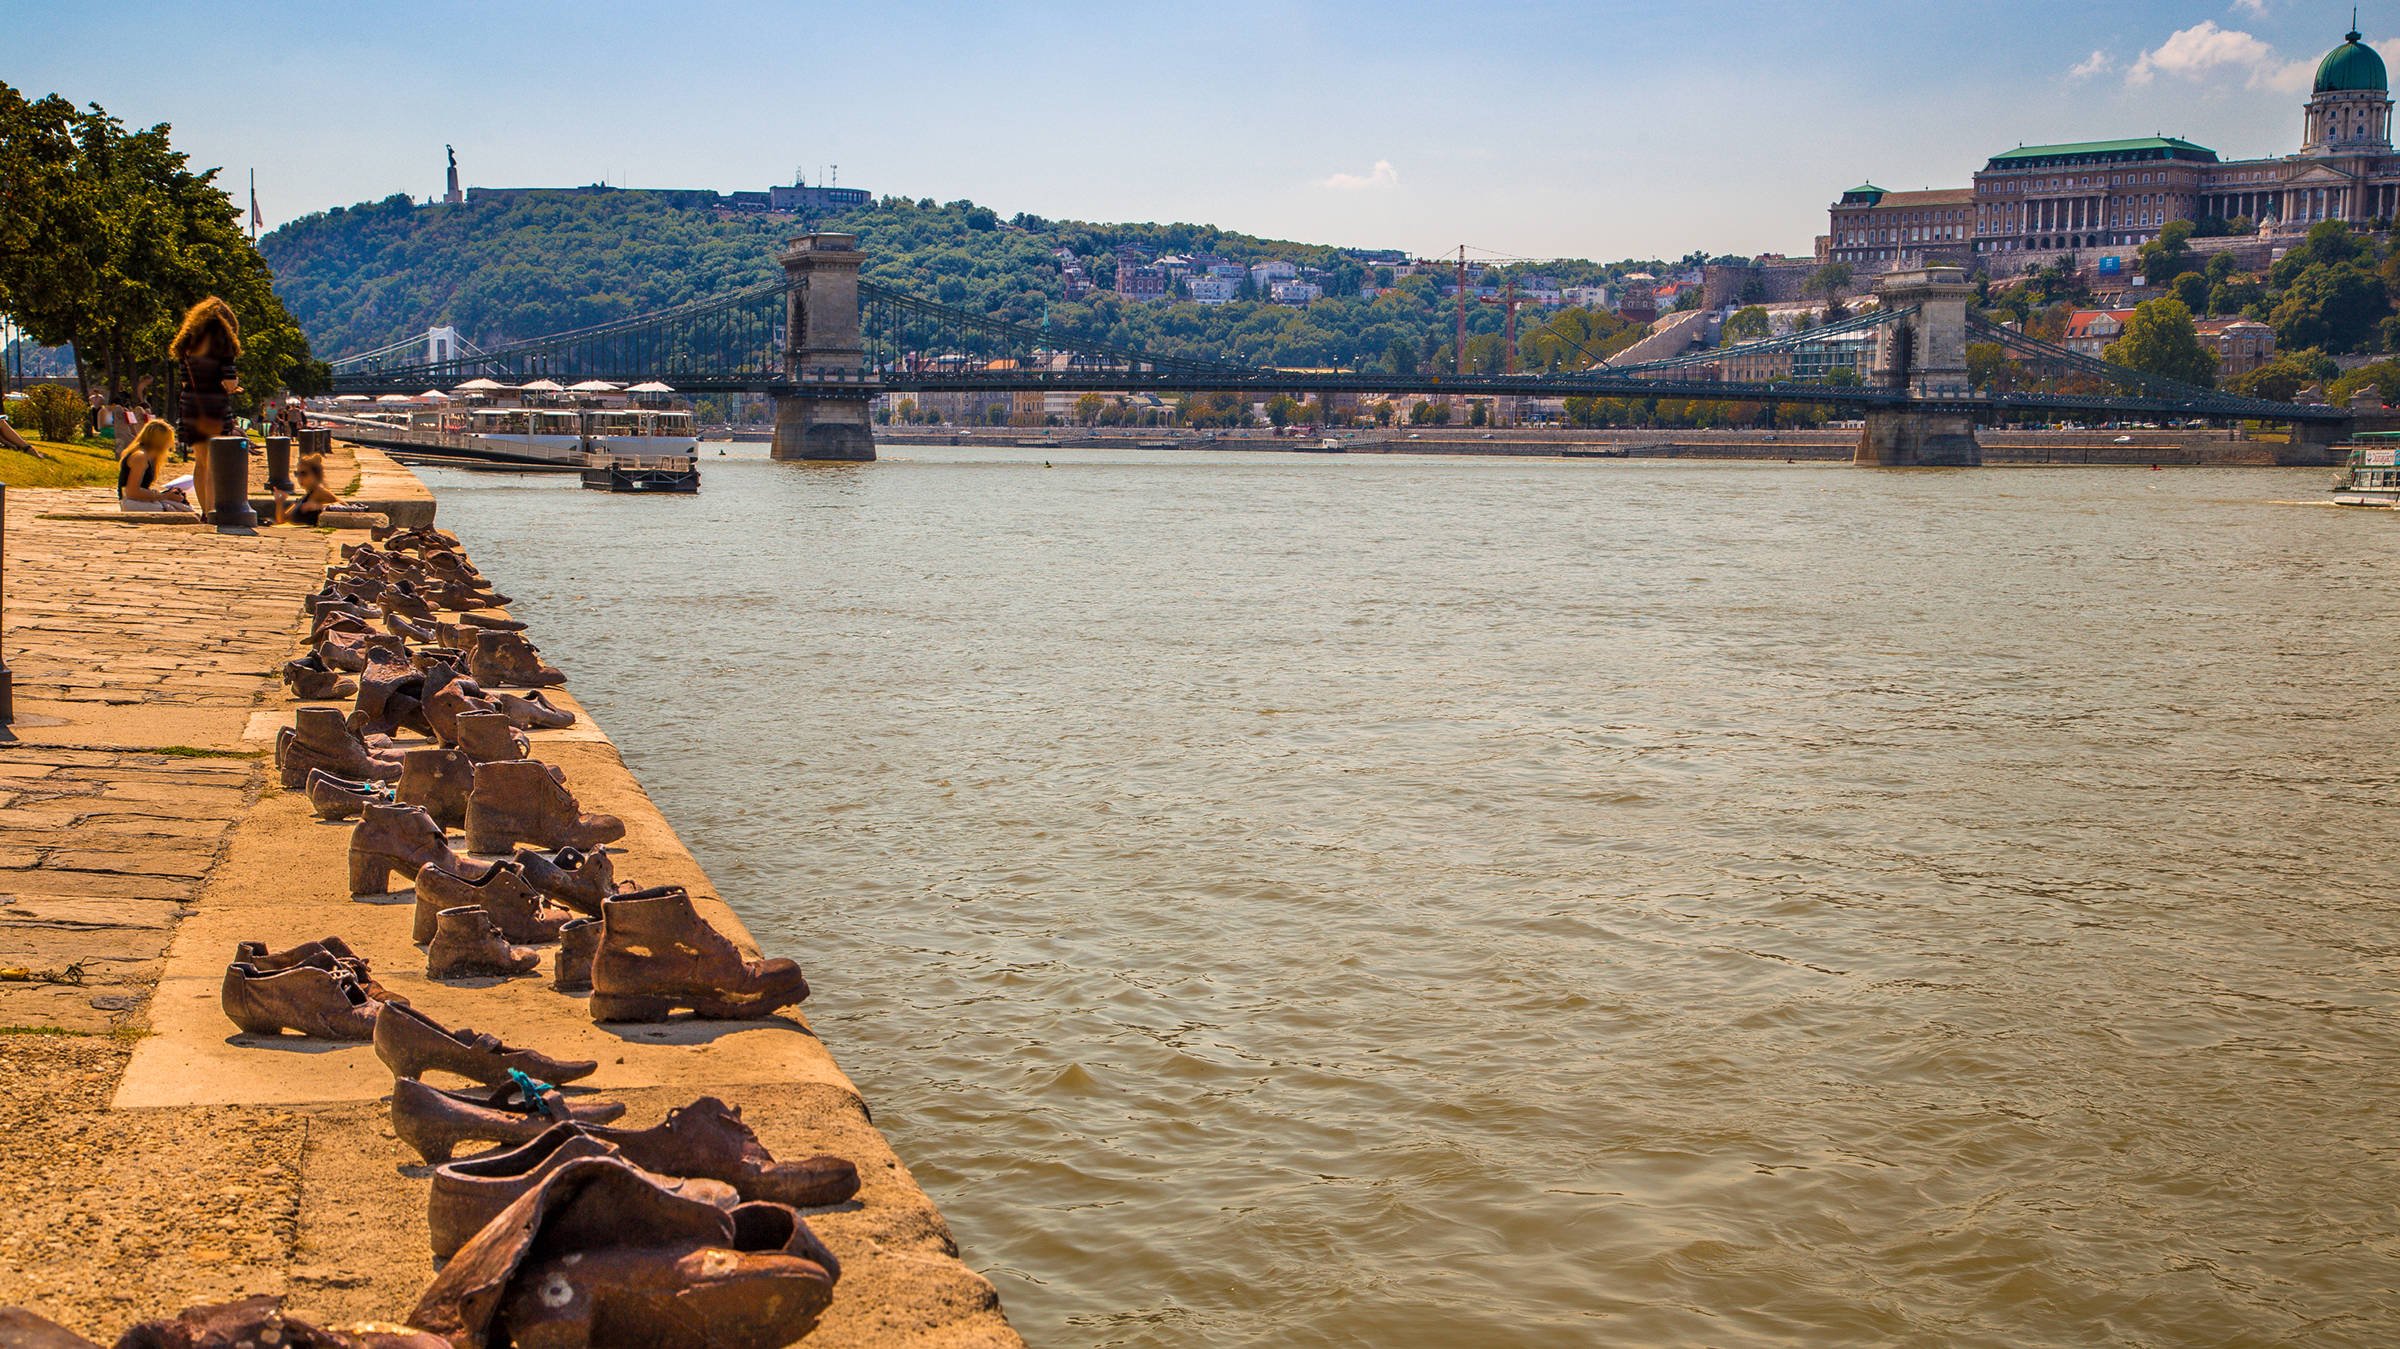 "Shoes on the Danube Bank" - H2 Hotel Budapest - Official website